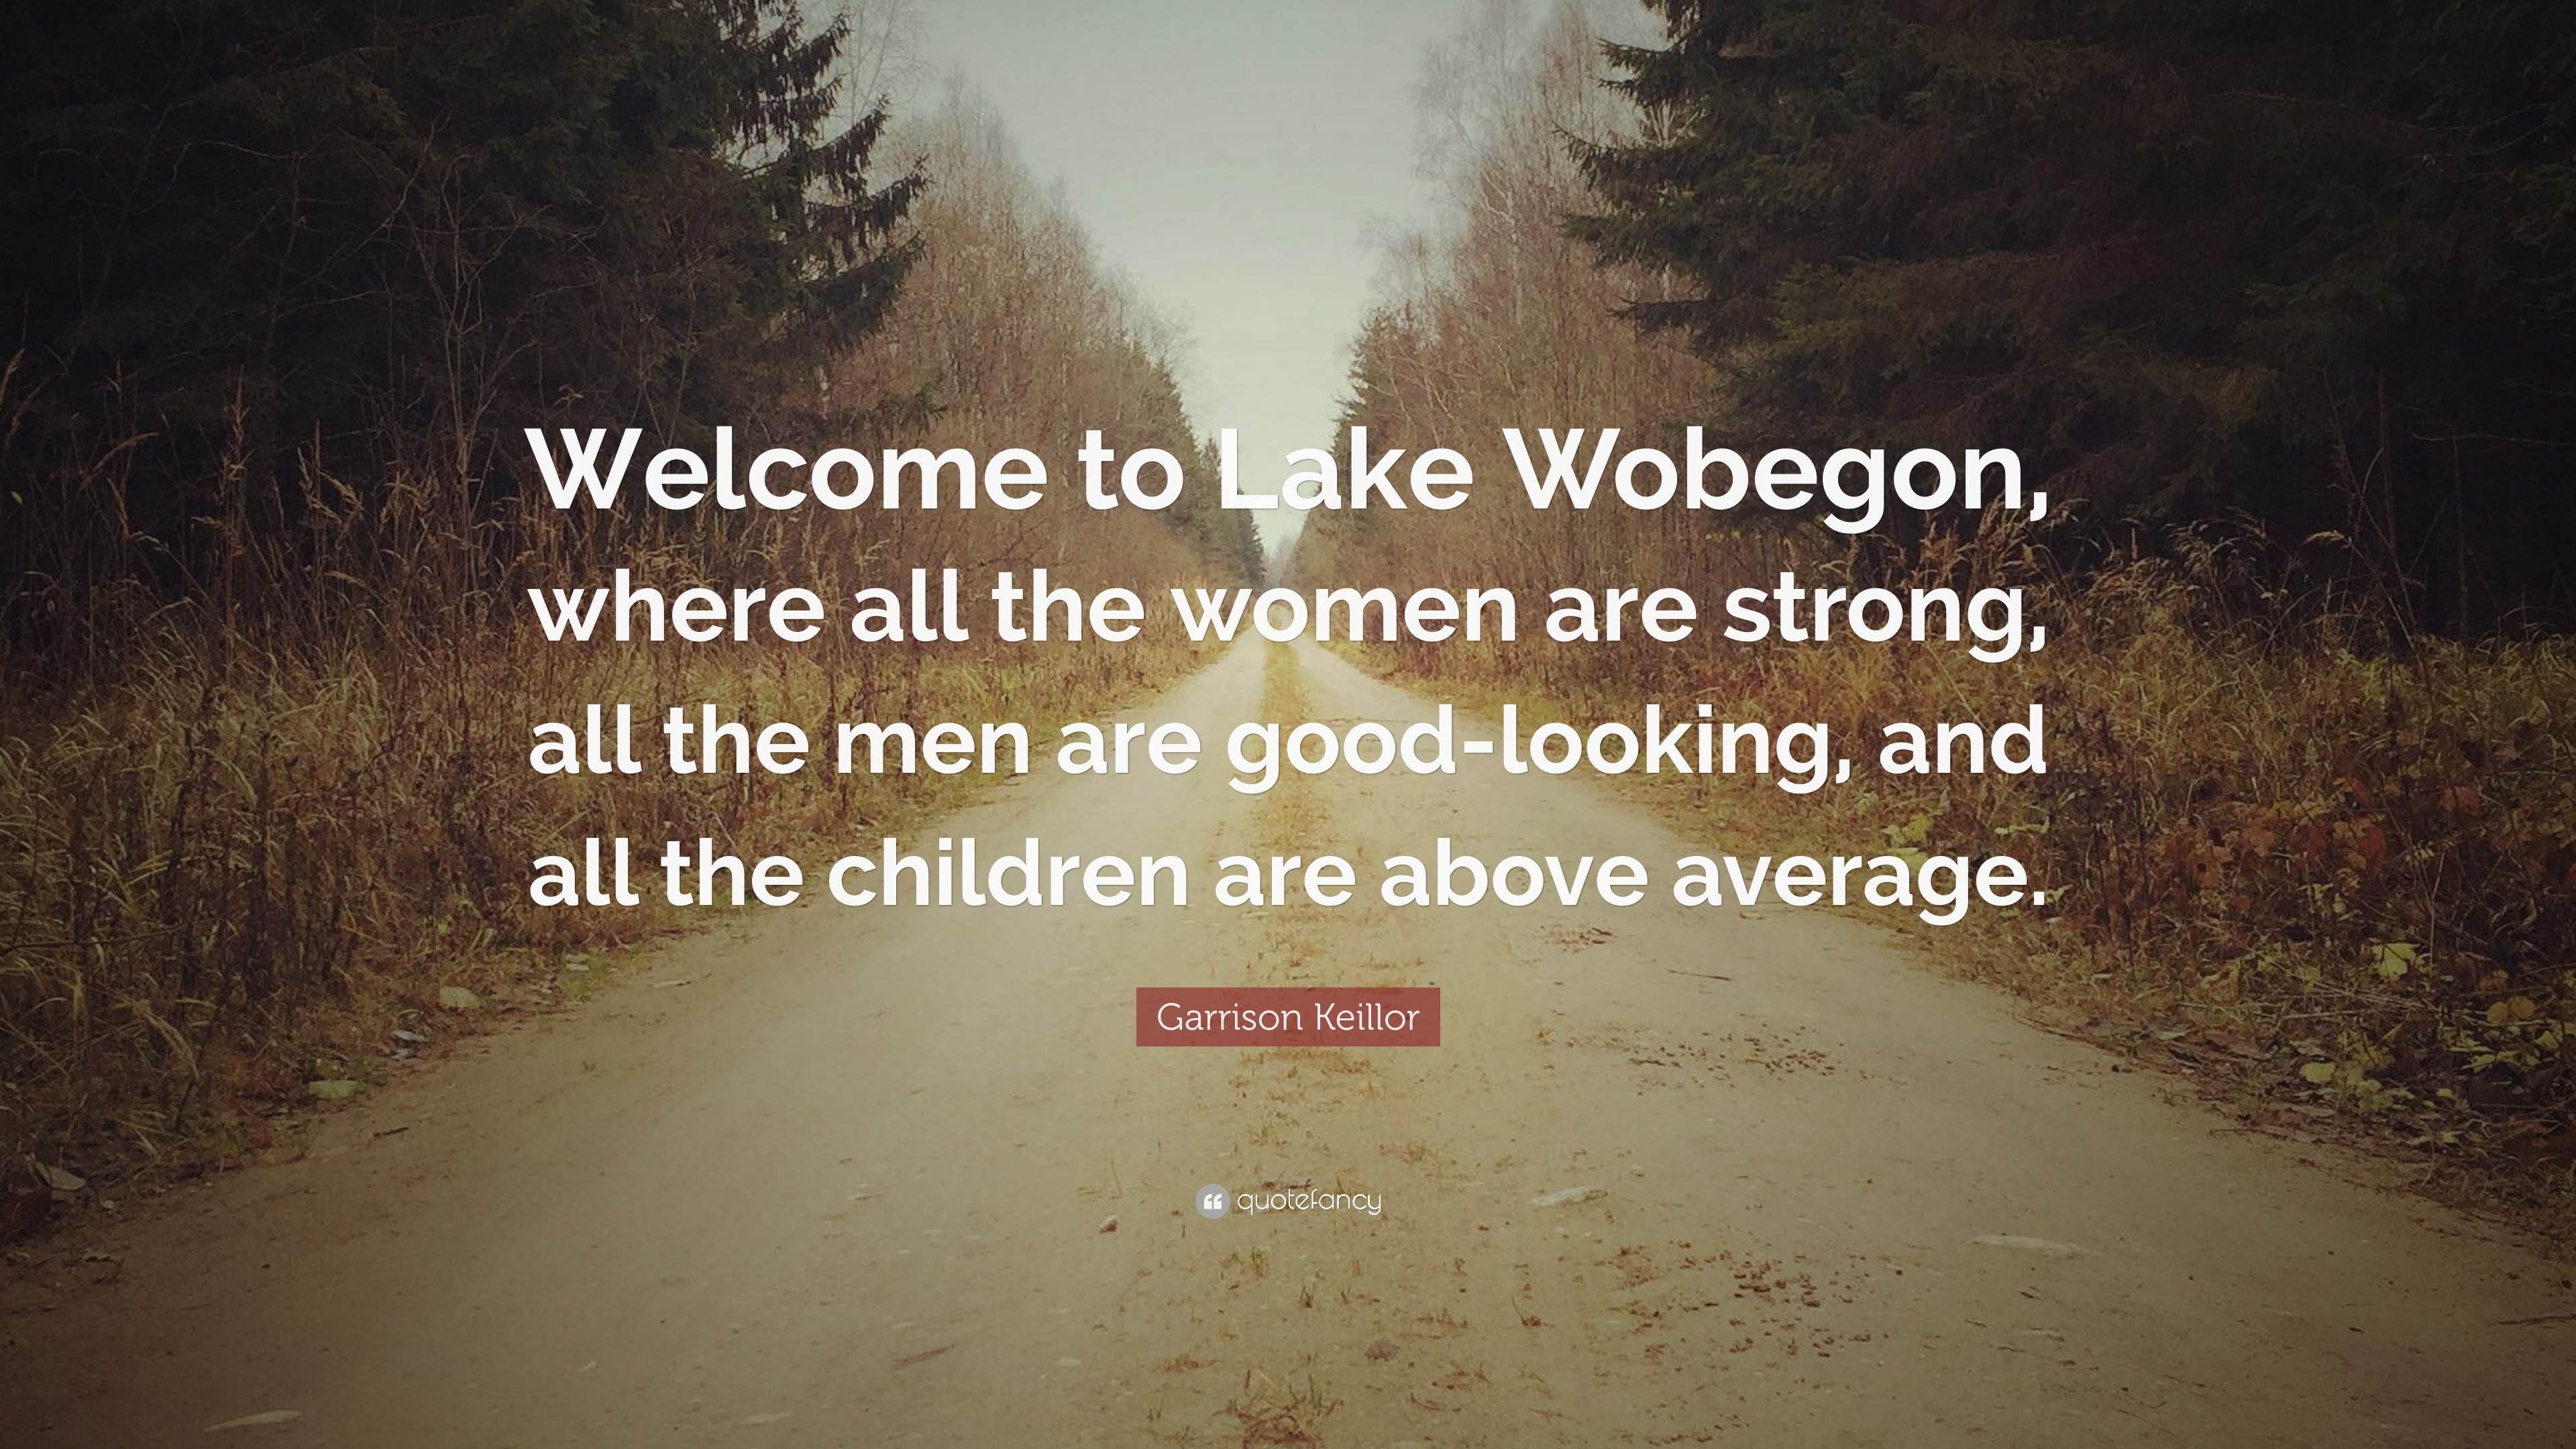 Garrison Keillor Quote: “Welcome to Lake Wobegon, where all the women are strong, all the men are good-looking, and all the children are above av...”